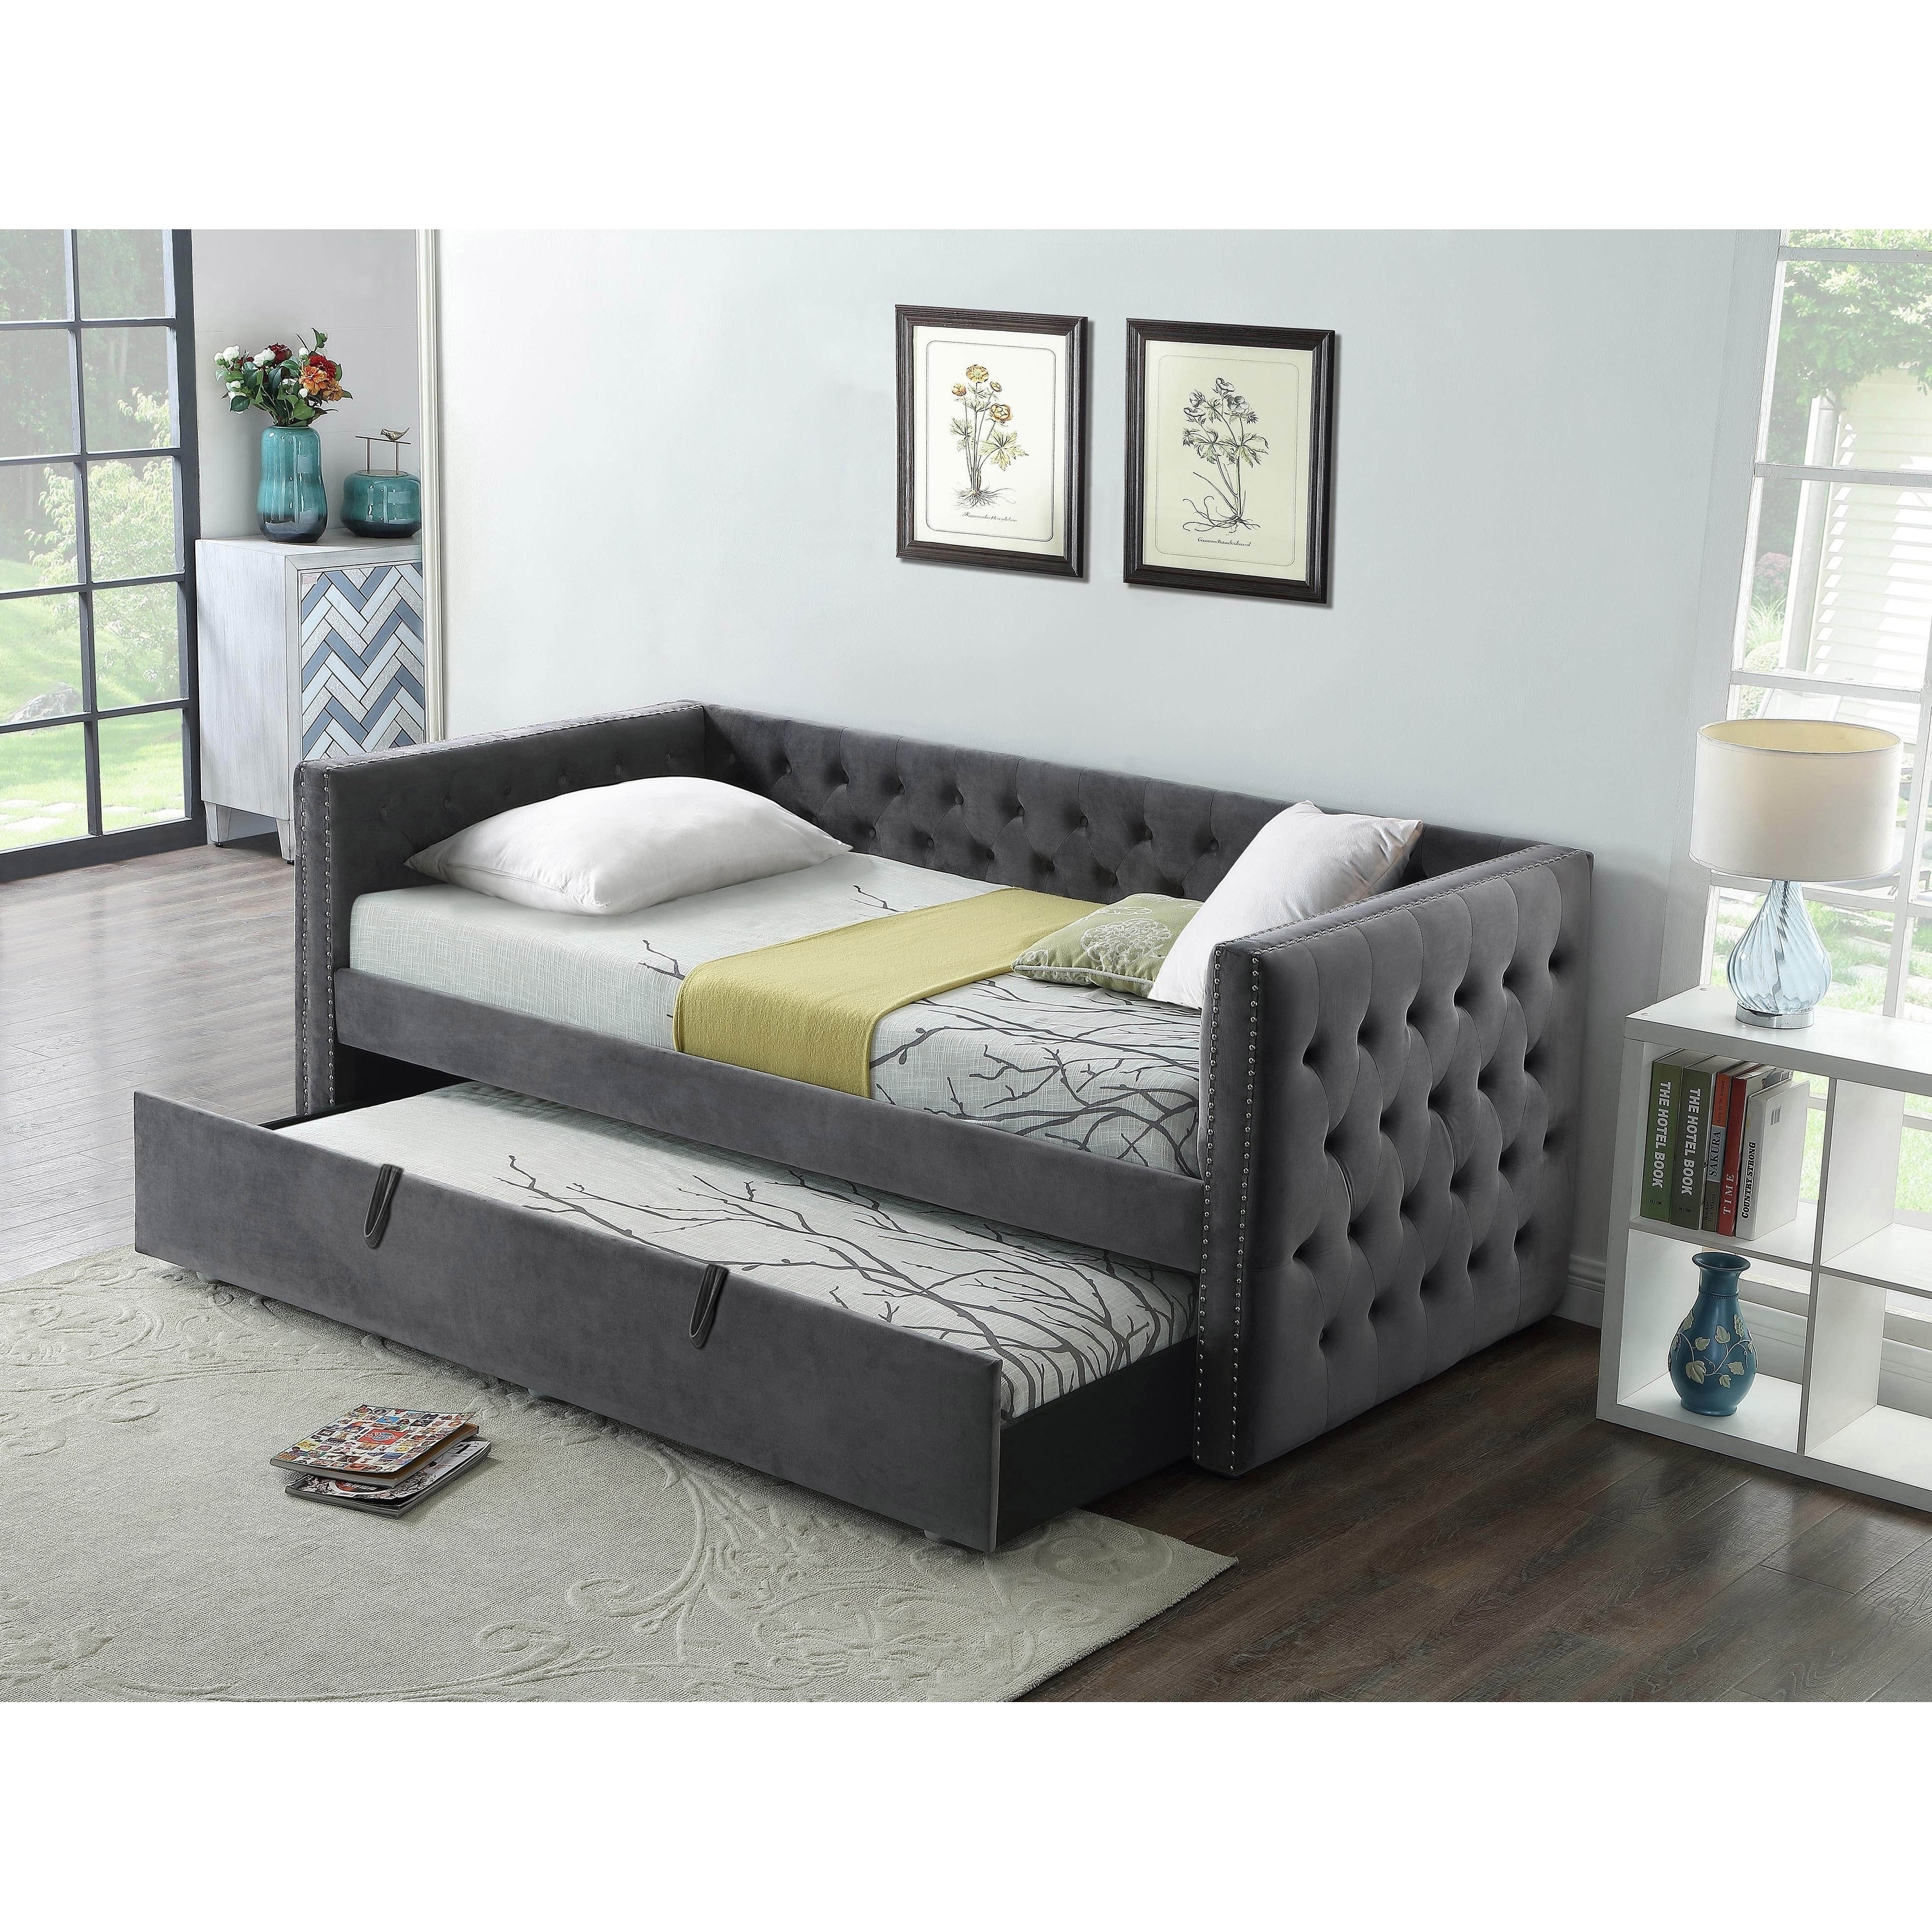 twin daybed with trundle included